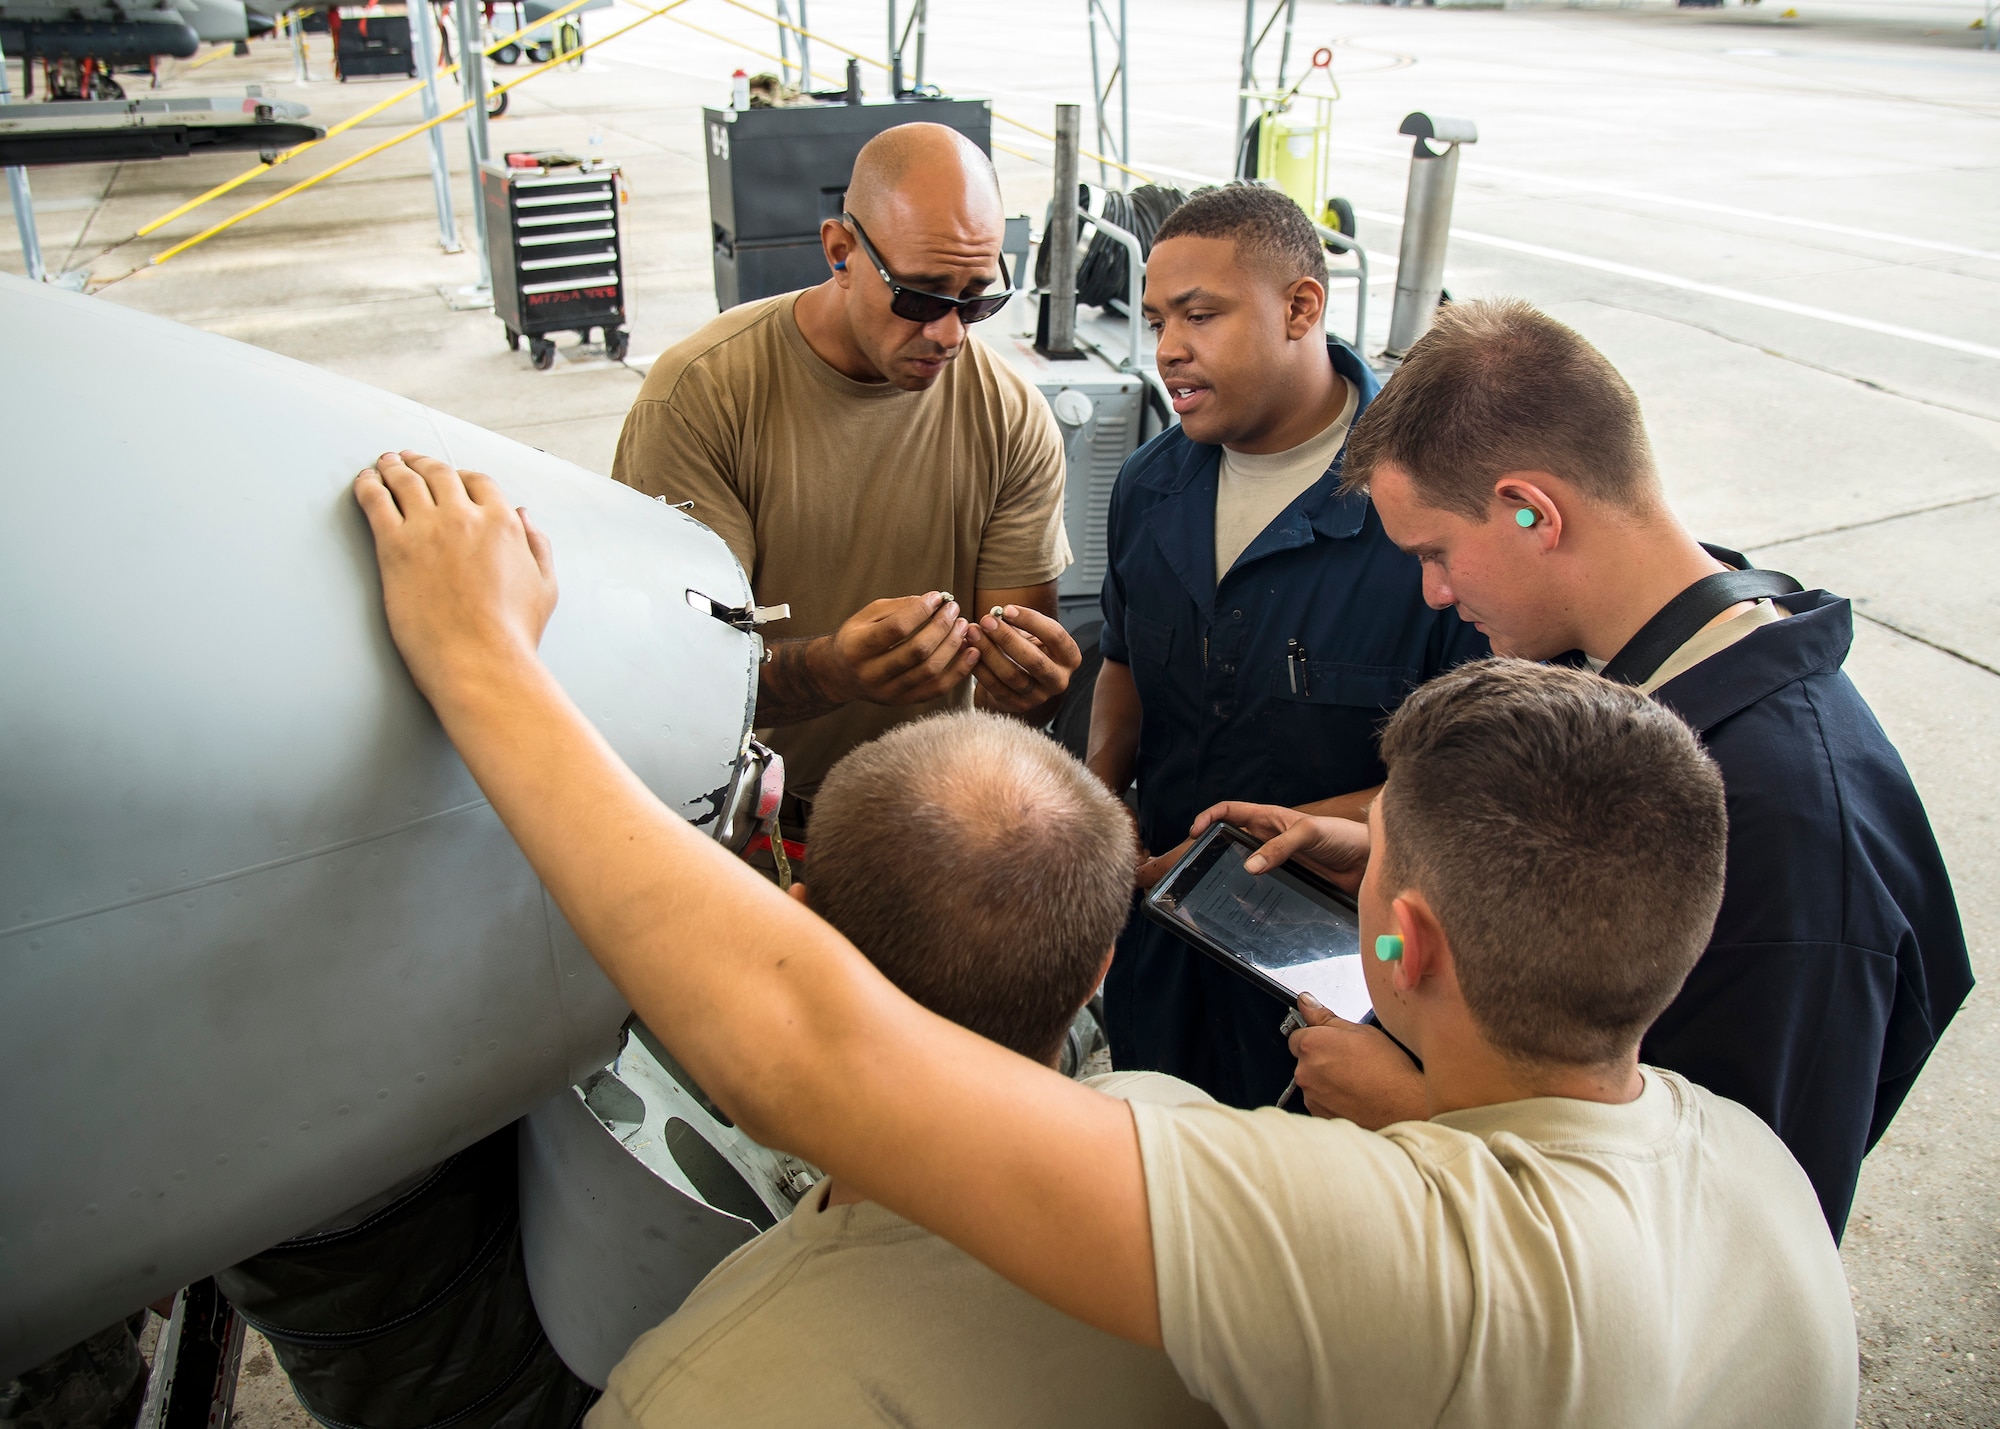 Airmen from the 75th Aircraft Maintenance Unit perform maintenance on an A-10C Thunderbolt II during a sortie surge exercise, July 24, 2019, at Moody Air Force Base, Ga. The exercise was conducted to determine Airmen's abilities to perform effectively while generating combat or training sorties at an accelerated rate. Throughout the four-day surge, pilots and maintainers completed 131 sorties spanning approximately 152 flying hours. (U.S. Air Force photo by Airman 1st Class Eugene Oliver)